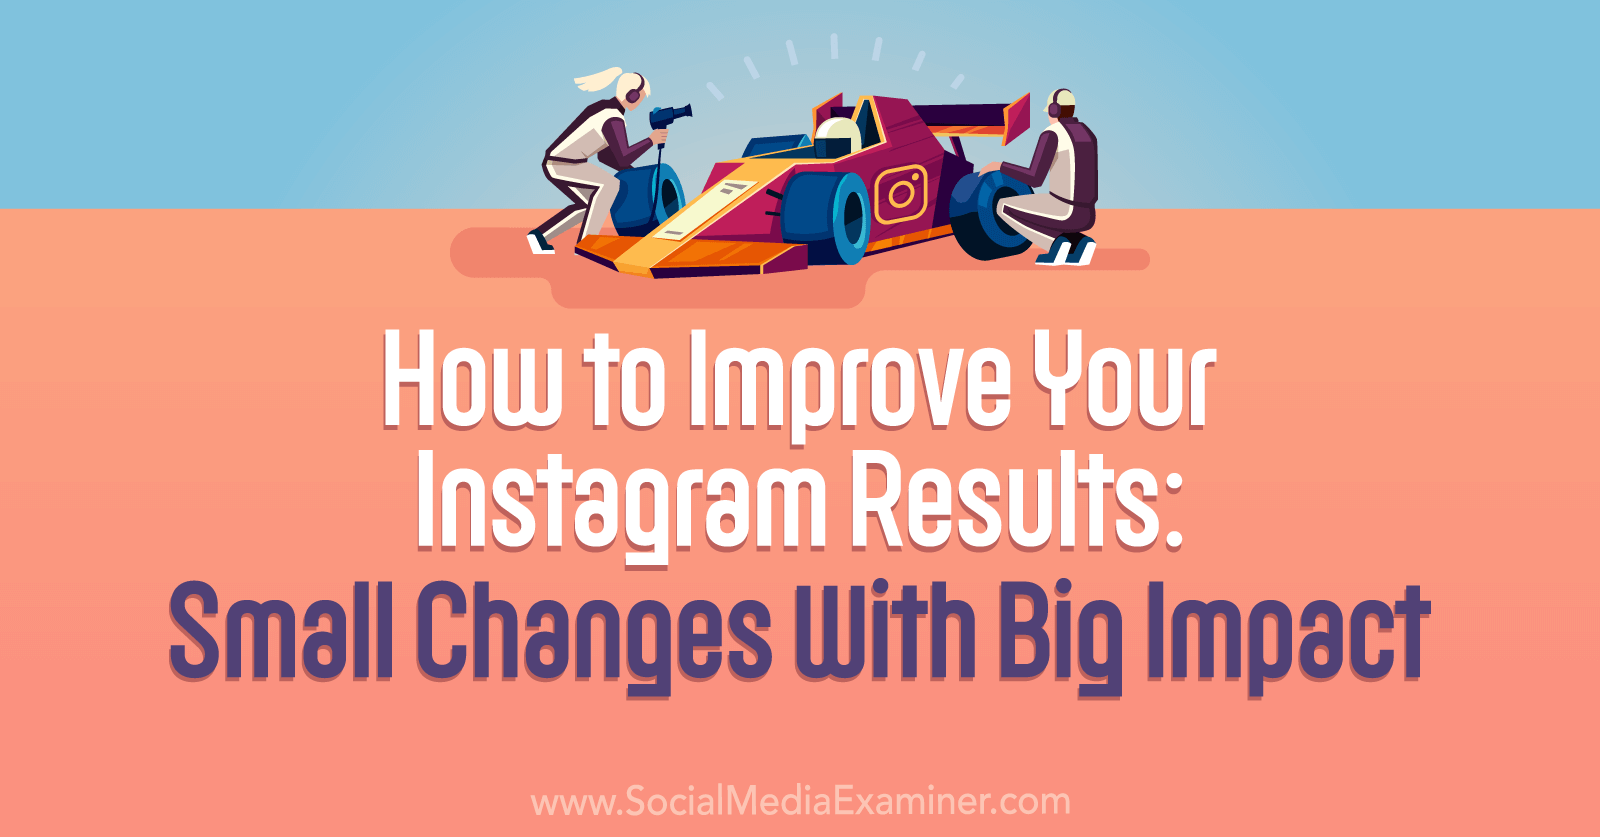 How to Improve Your Instagram Results: Small Changes With Big Impacts by Social Media Examiner